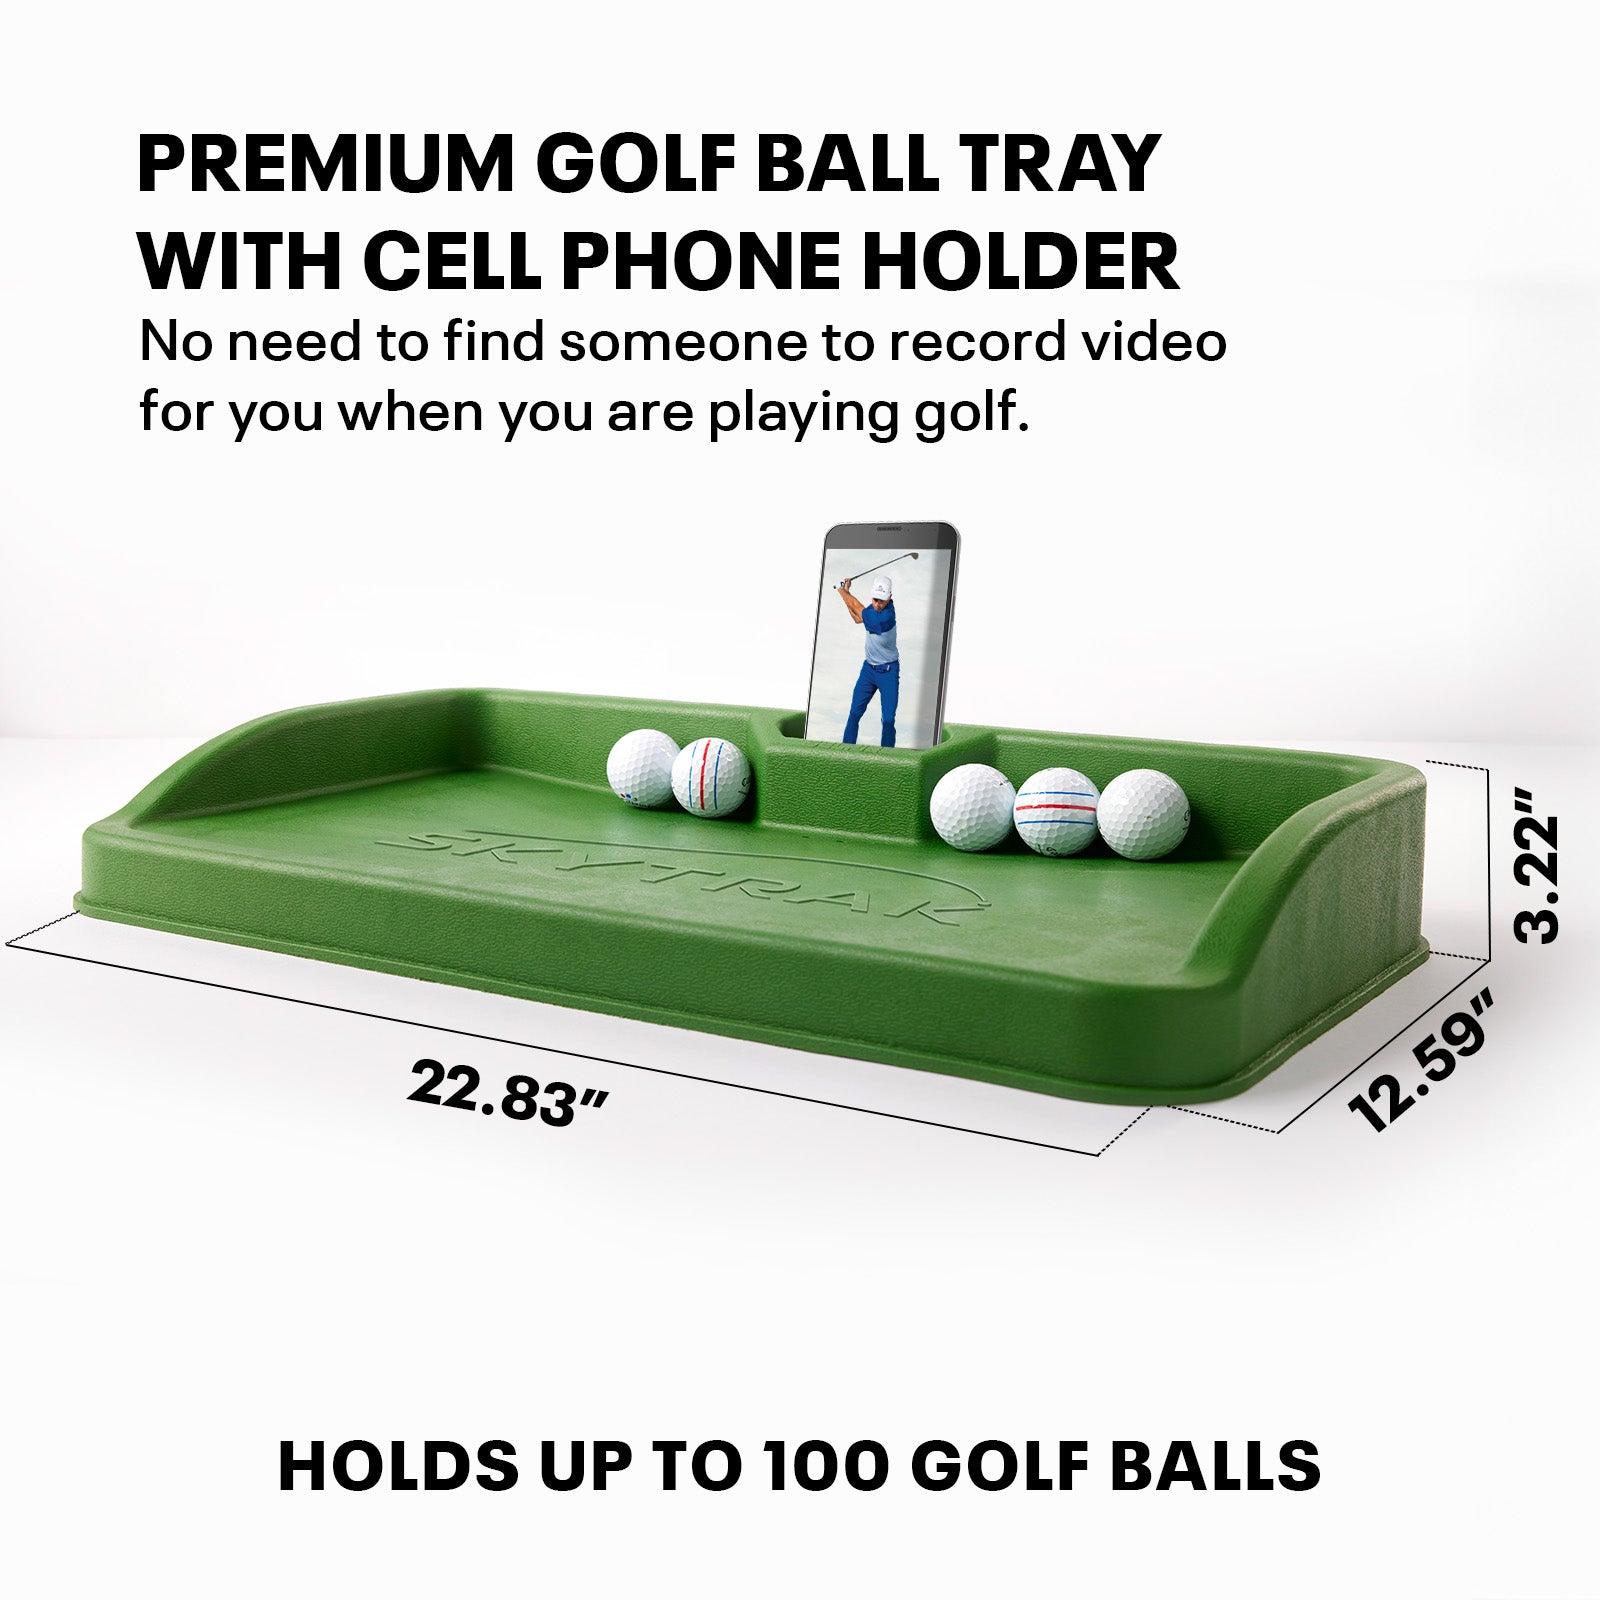 Improve your game and play better golf with these golf simulator accessories